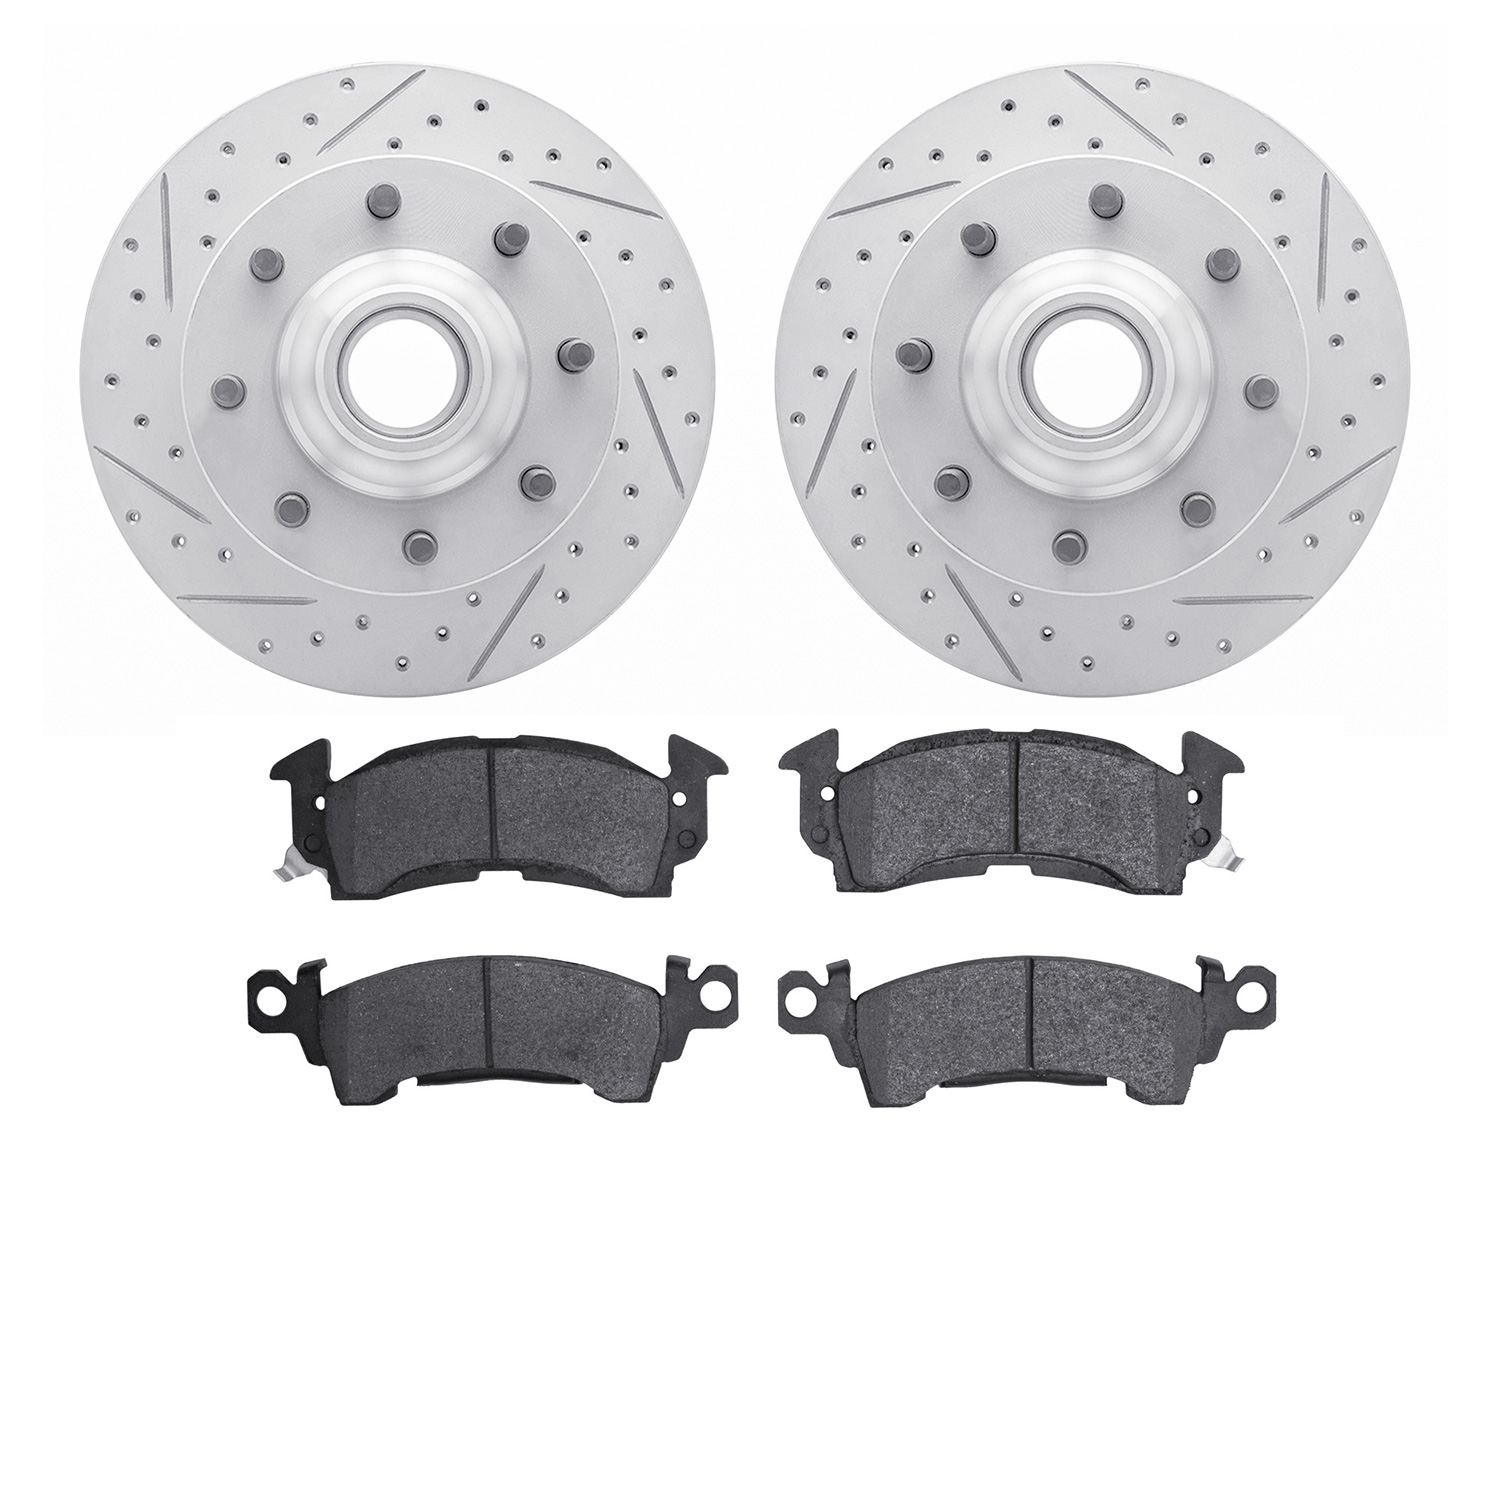 2202-48005 Geoperformance Drilled/Slotted Rotors w/Heavy-Duty Pads Kit, 1971-1989 GM, Position: Front